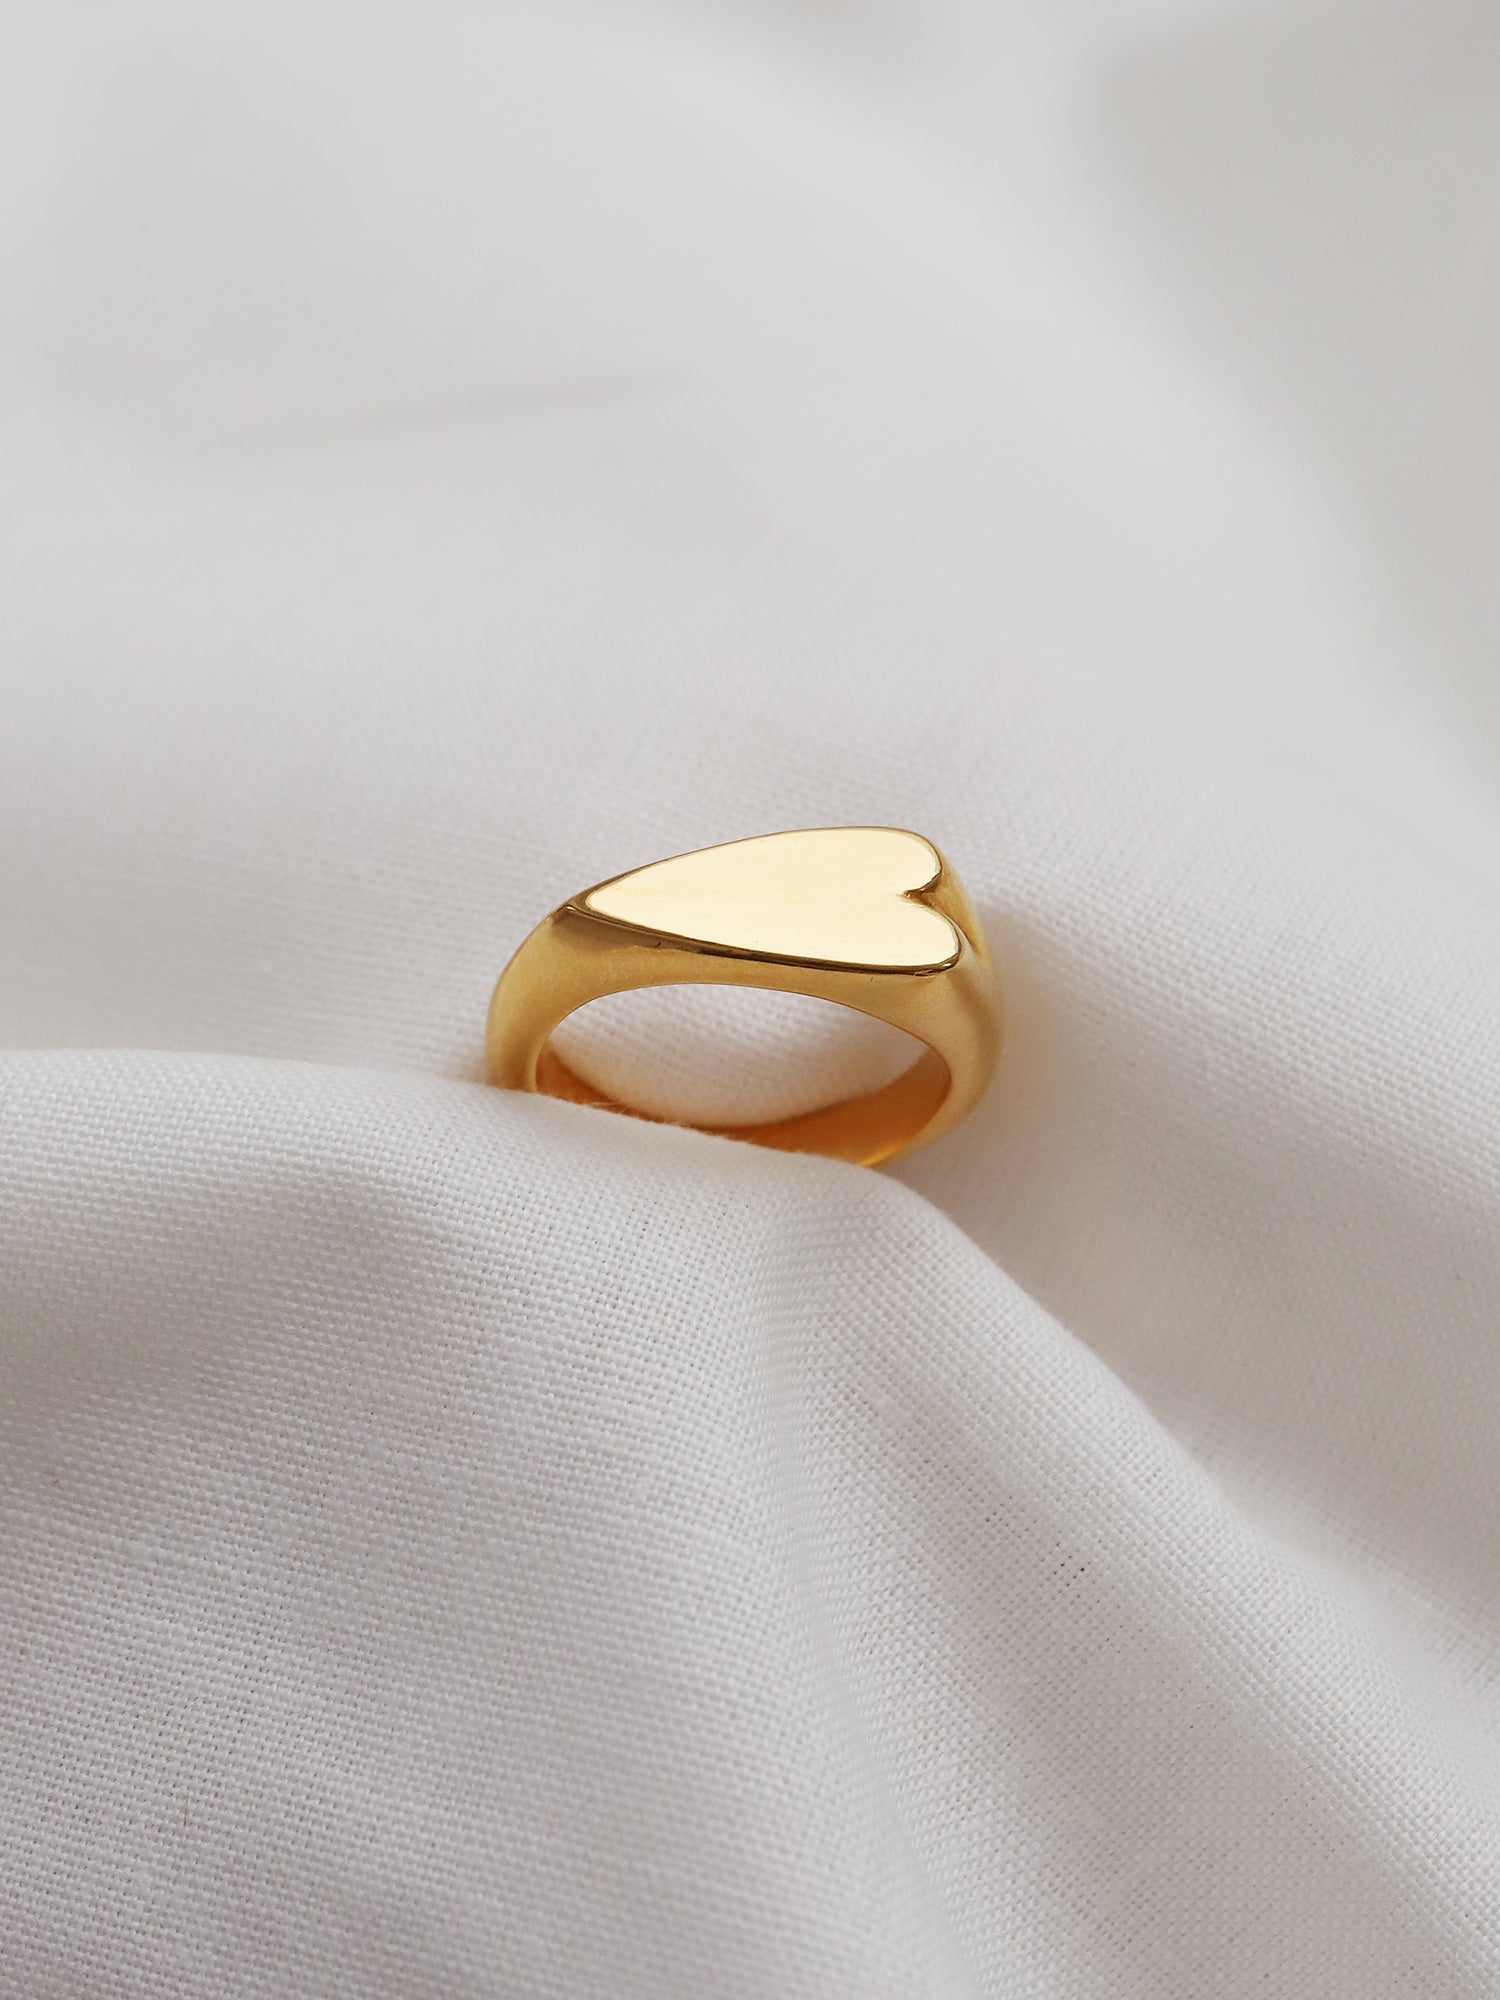 Dreamer Ring - Gold Plated Vermeil